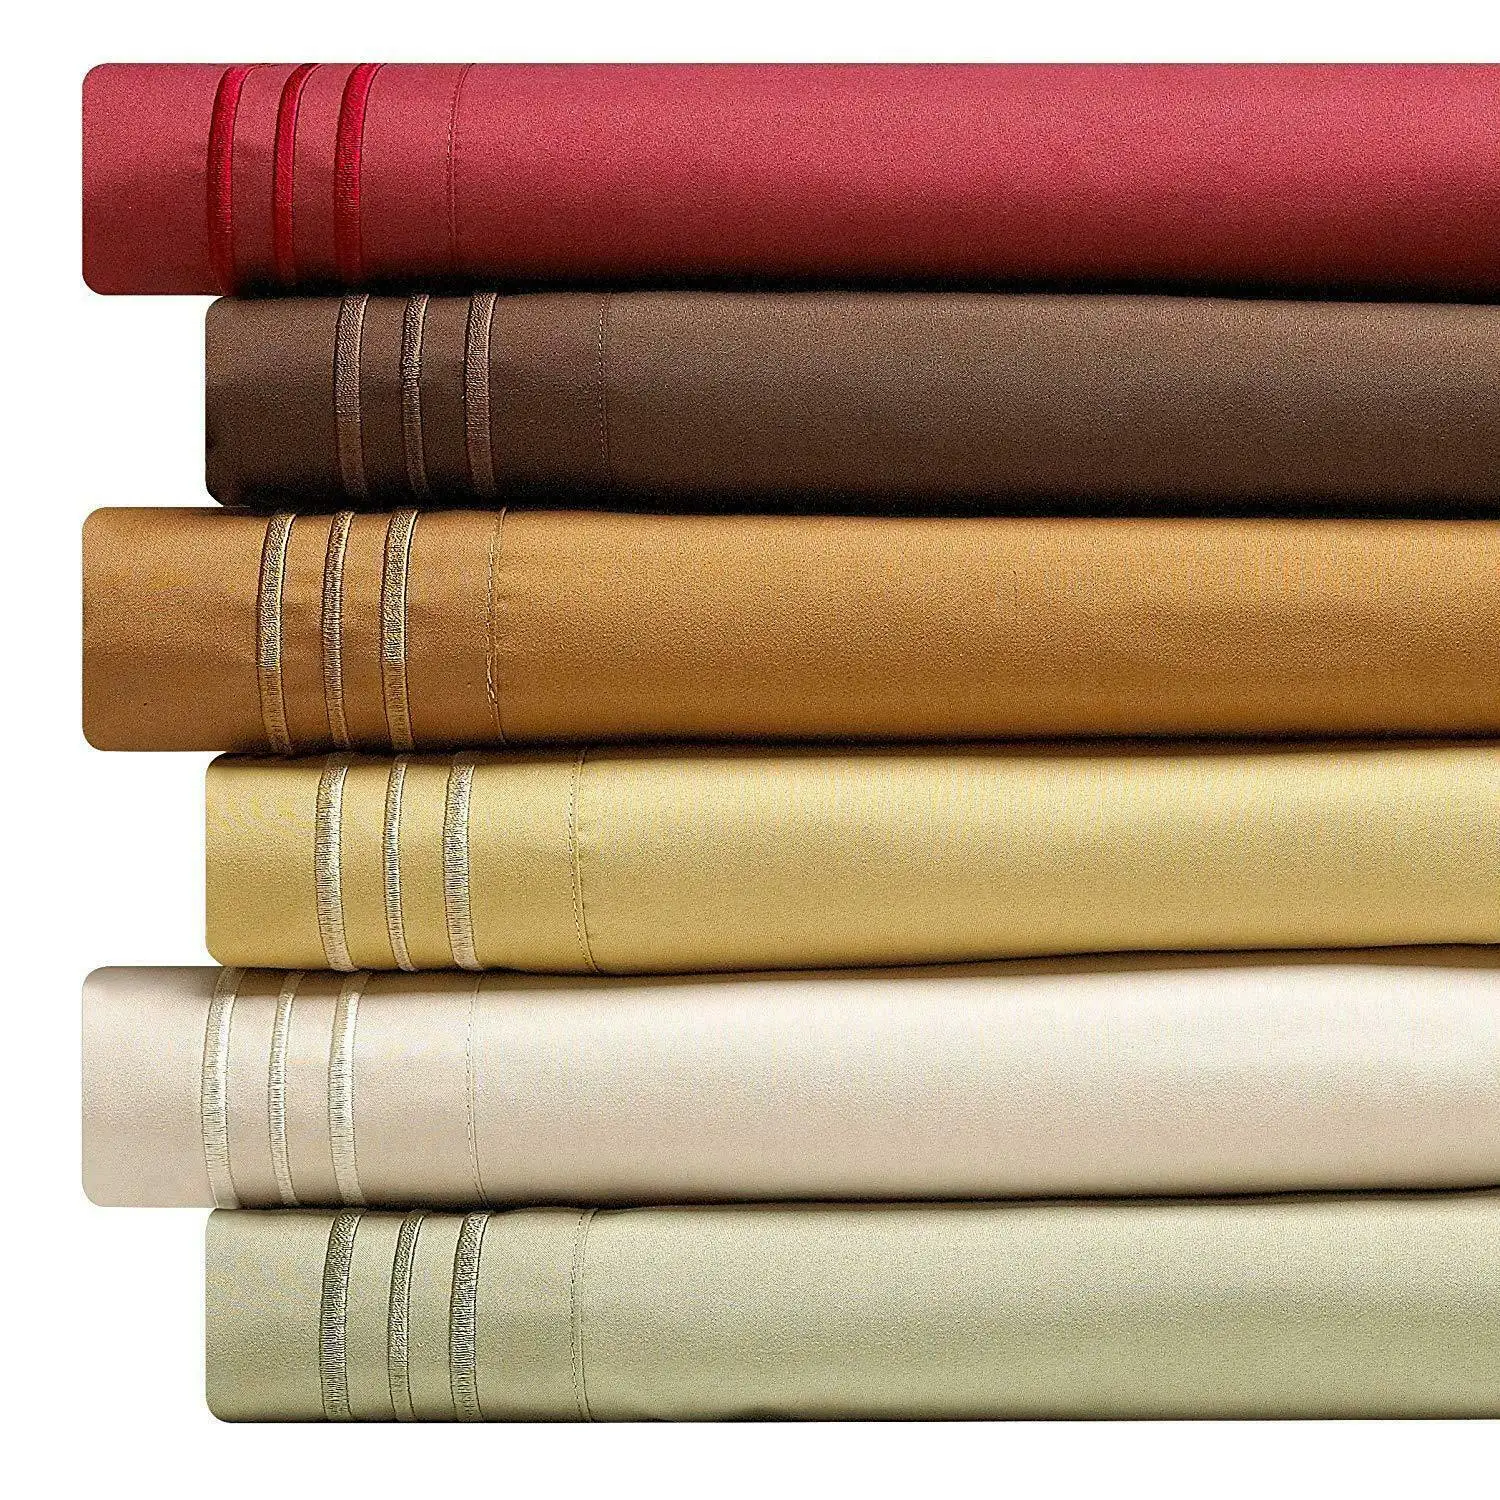 6 PIECE 2100 COUNT DEEP POCKET BAMBOO SERIES BED SUPER SOFT SHEET SET MOST SIZES